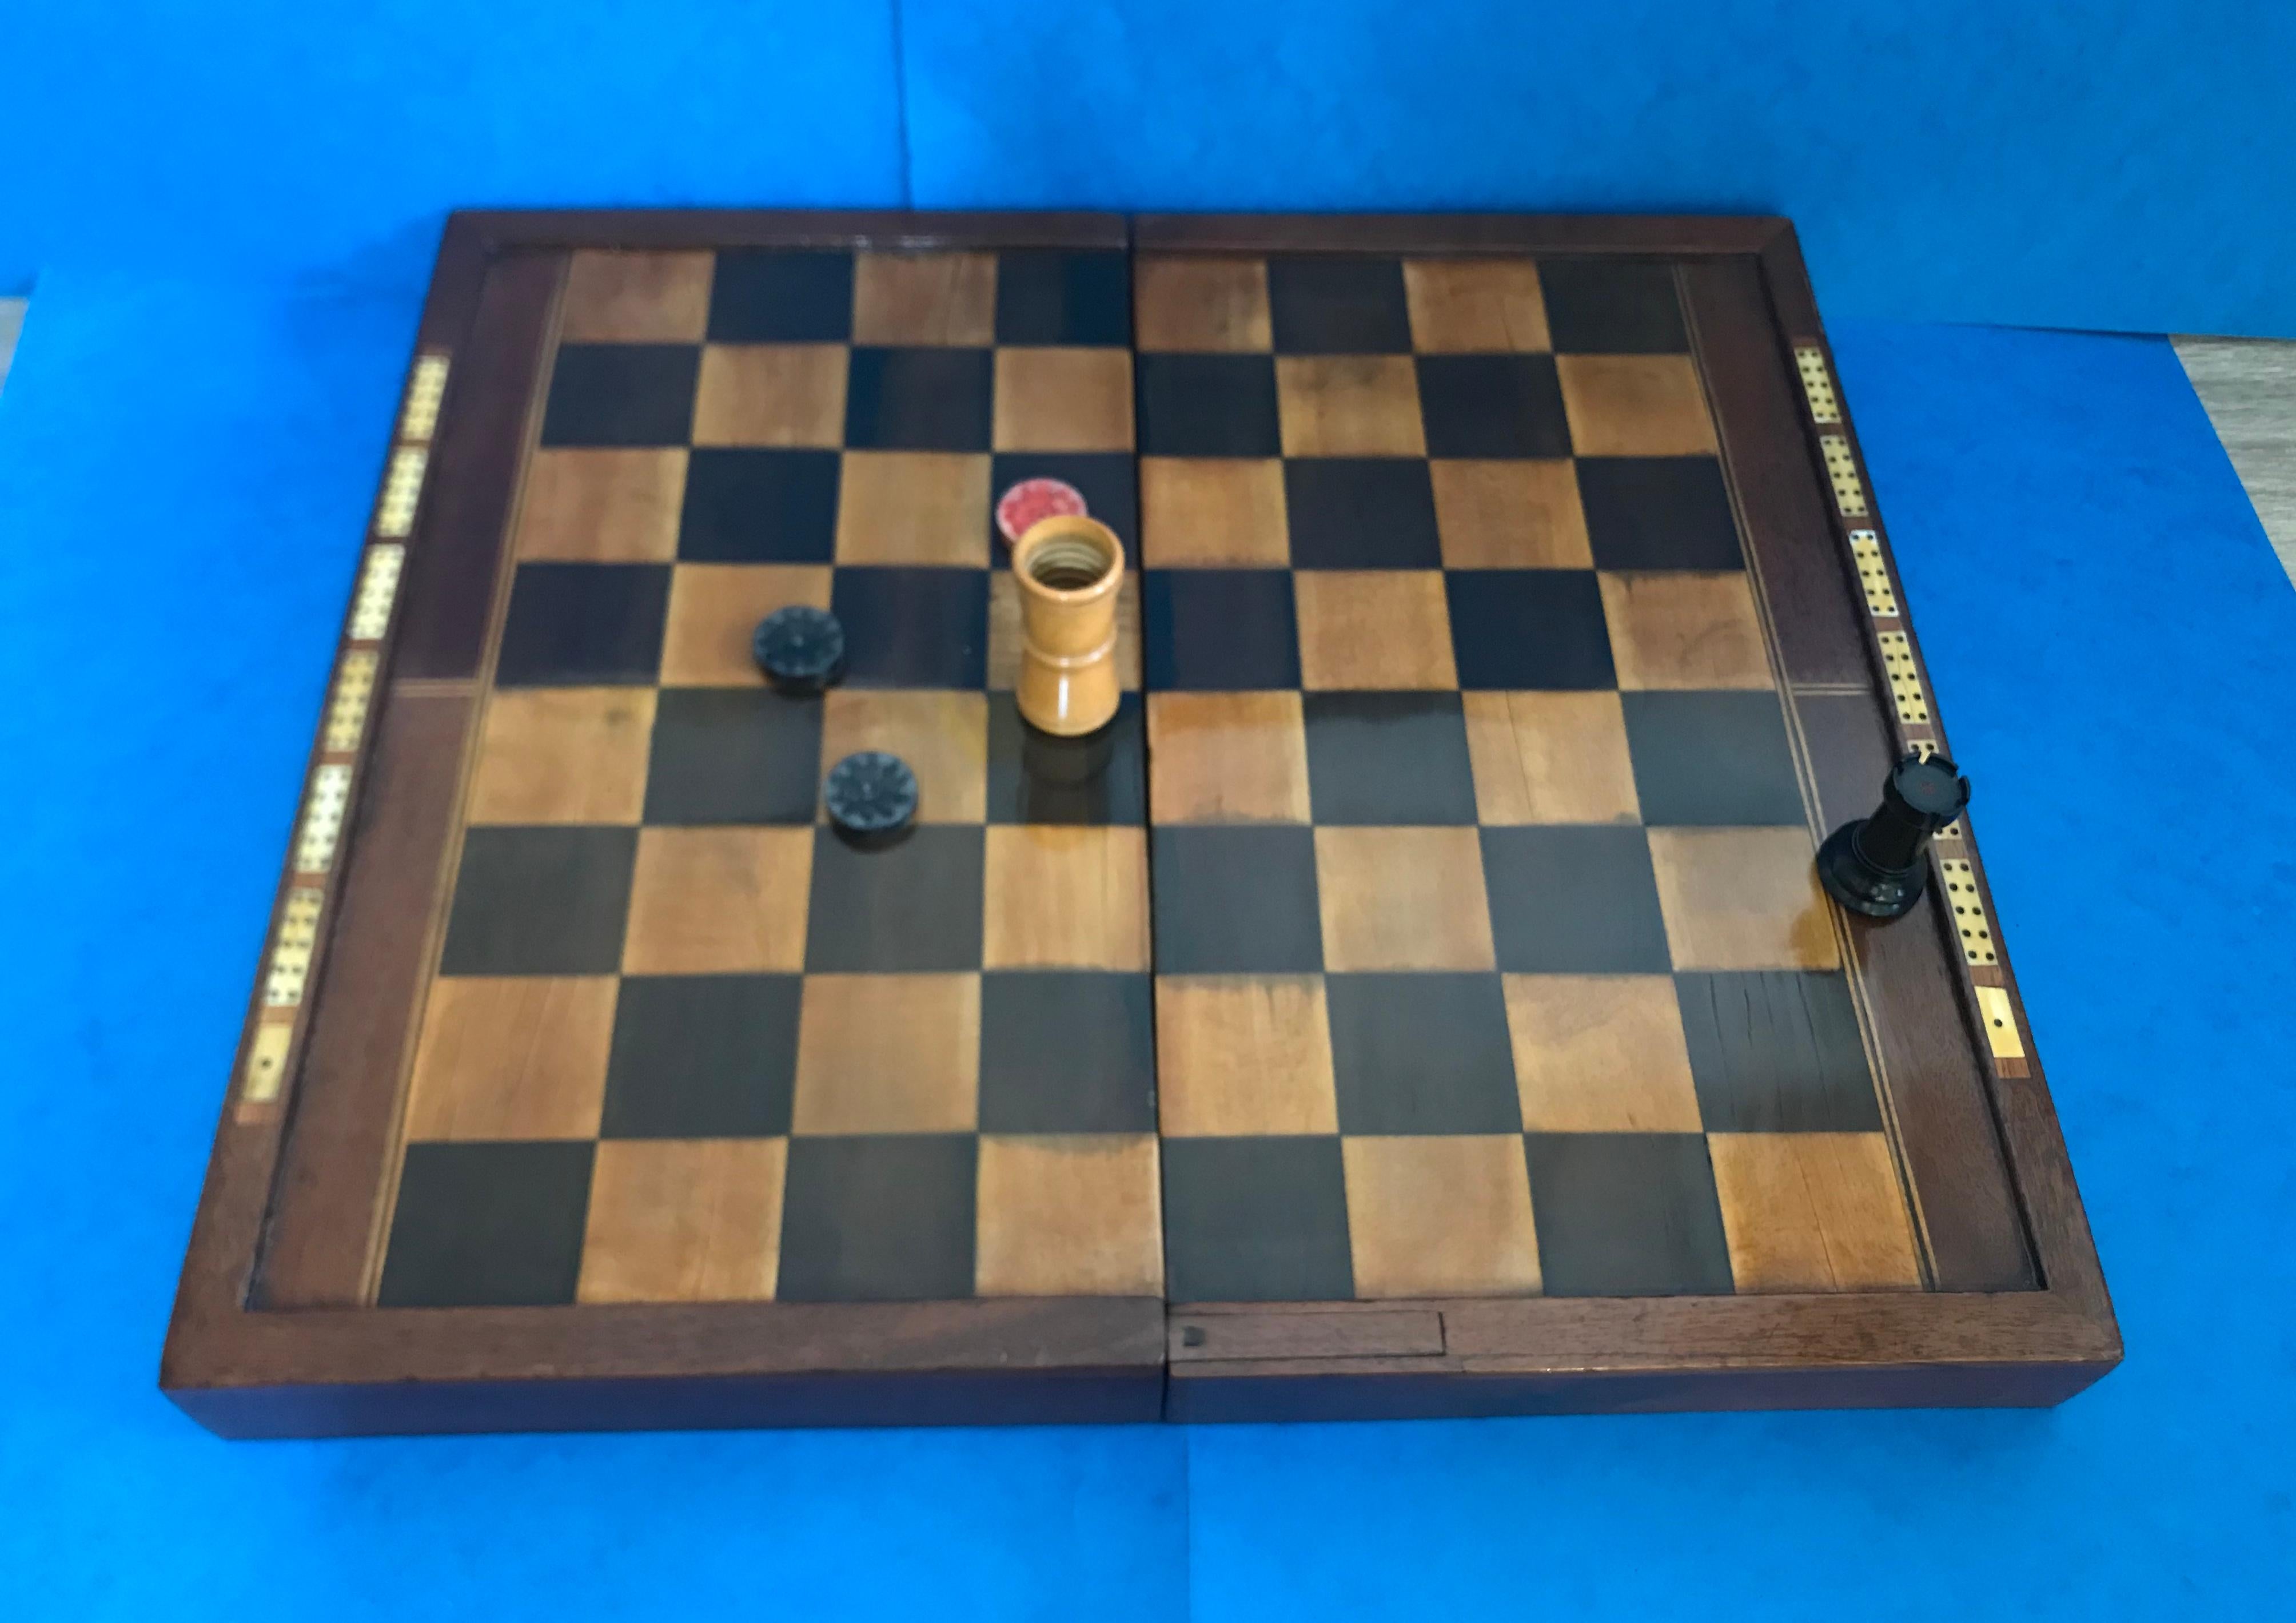 Georgian games box, complete with a ‘Stalton’ chess set and a soapstone backgammon set.
An exquisite solid mahogany and fruitwood inlaid games box that dates back to 1820. The squares of the board are inlaid with ebonised fruitwood and apple